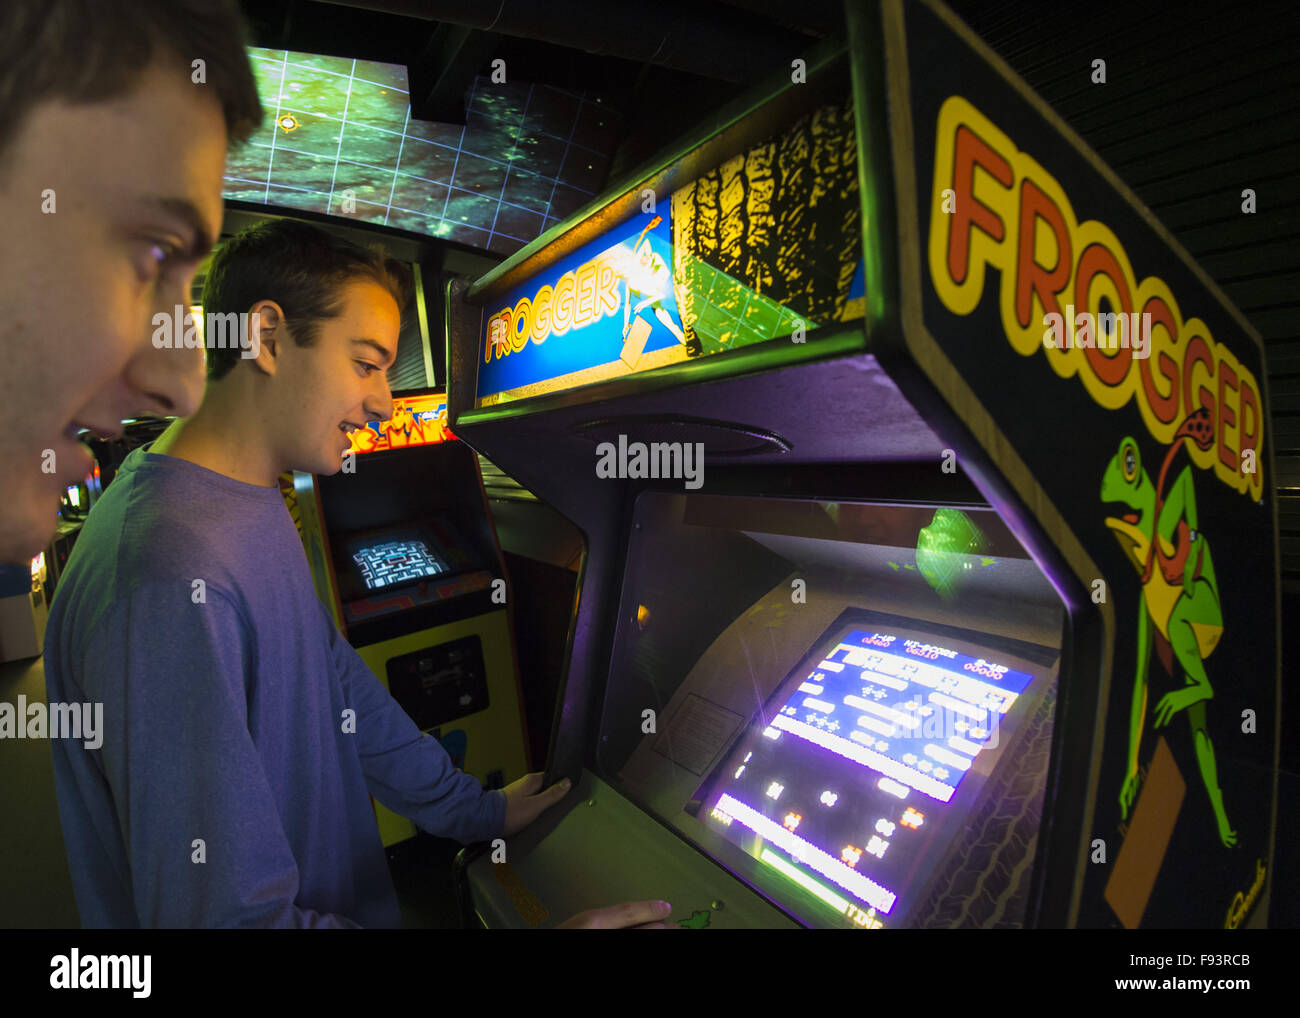 Garden City, New York, USA. 12th Dec, 2015. SETH ROSEN, 15, at right, from Roslyn, NY, and his cousin JACOB ROSEN, 21, from Miami, FLA, play FROGGER, a 1981 Sega Gremlin game, during Opening Day of Arcade Age exhibit, where visitors experience playing authentic classic games in arcade set up at Cradle of Aviation Museum in Long Island. Admission includes unlimited free pay-to-play of video arcade games, and games history is displayed outside arcade area. Exhibit runs from Dec. 12, 2015 through April 3, 2016. © Ann Parry/ZUMA Wire/Alamy Live News Stock Photo